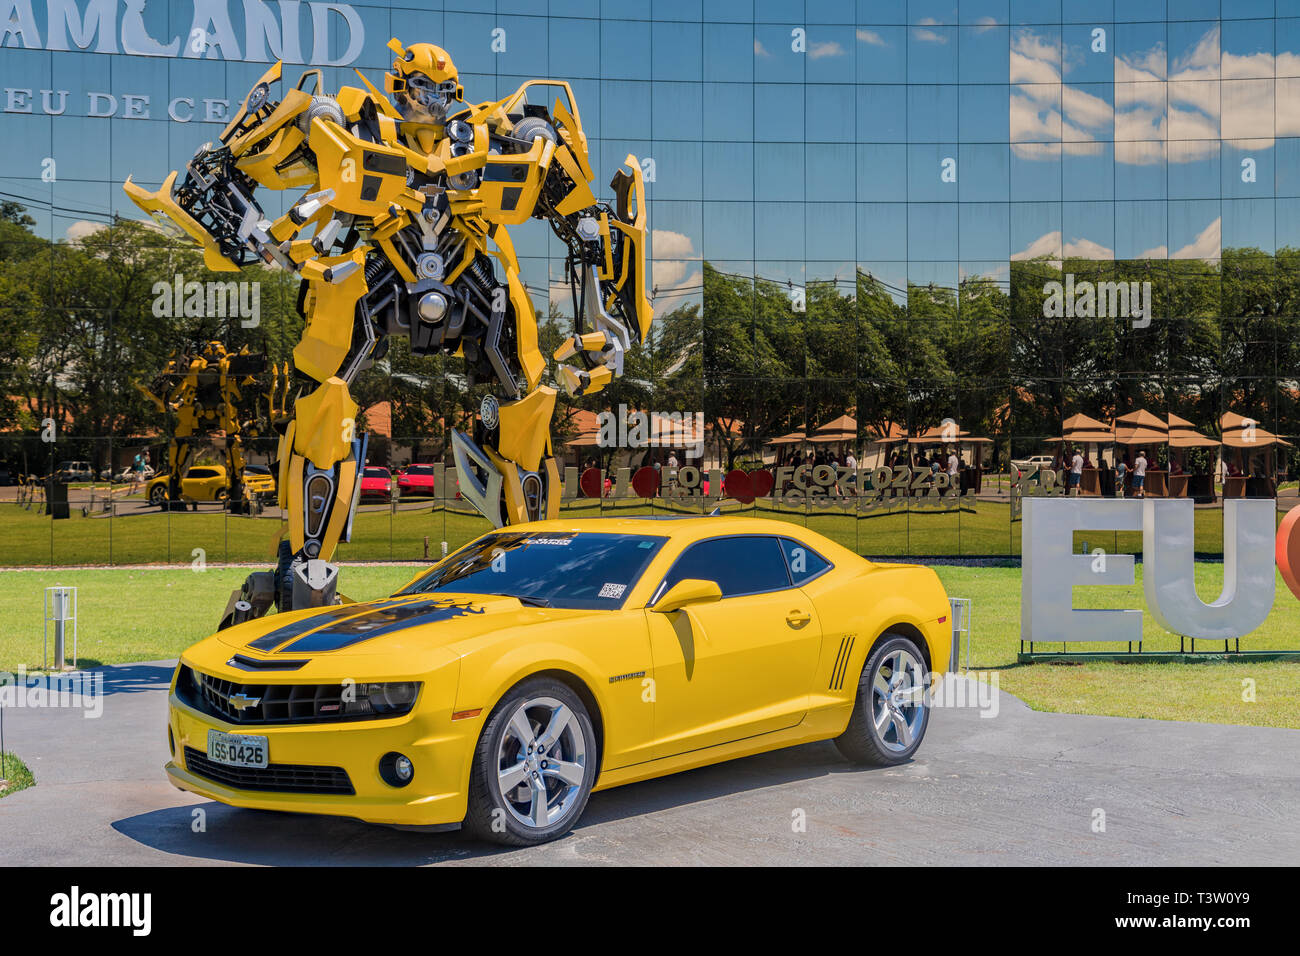 Foz do Iguacu, Brazil - November 22, 2017:  Bumblebee Transformer in front of the Wax Museum 'Dreamland' in Foz do Iguacu near the famous Iguacu Falls Stock Photo